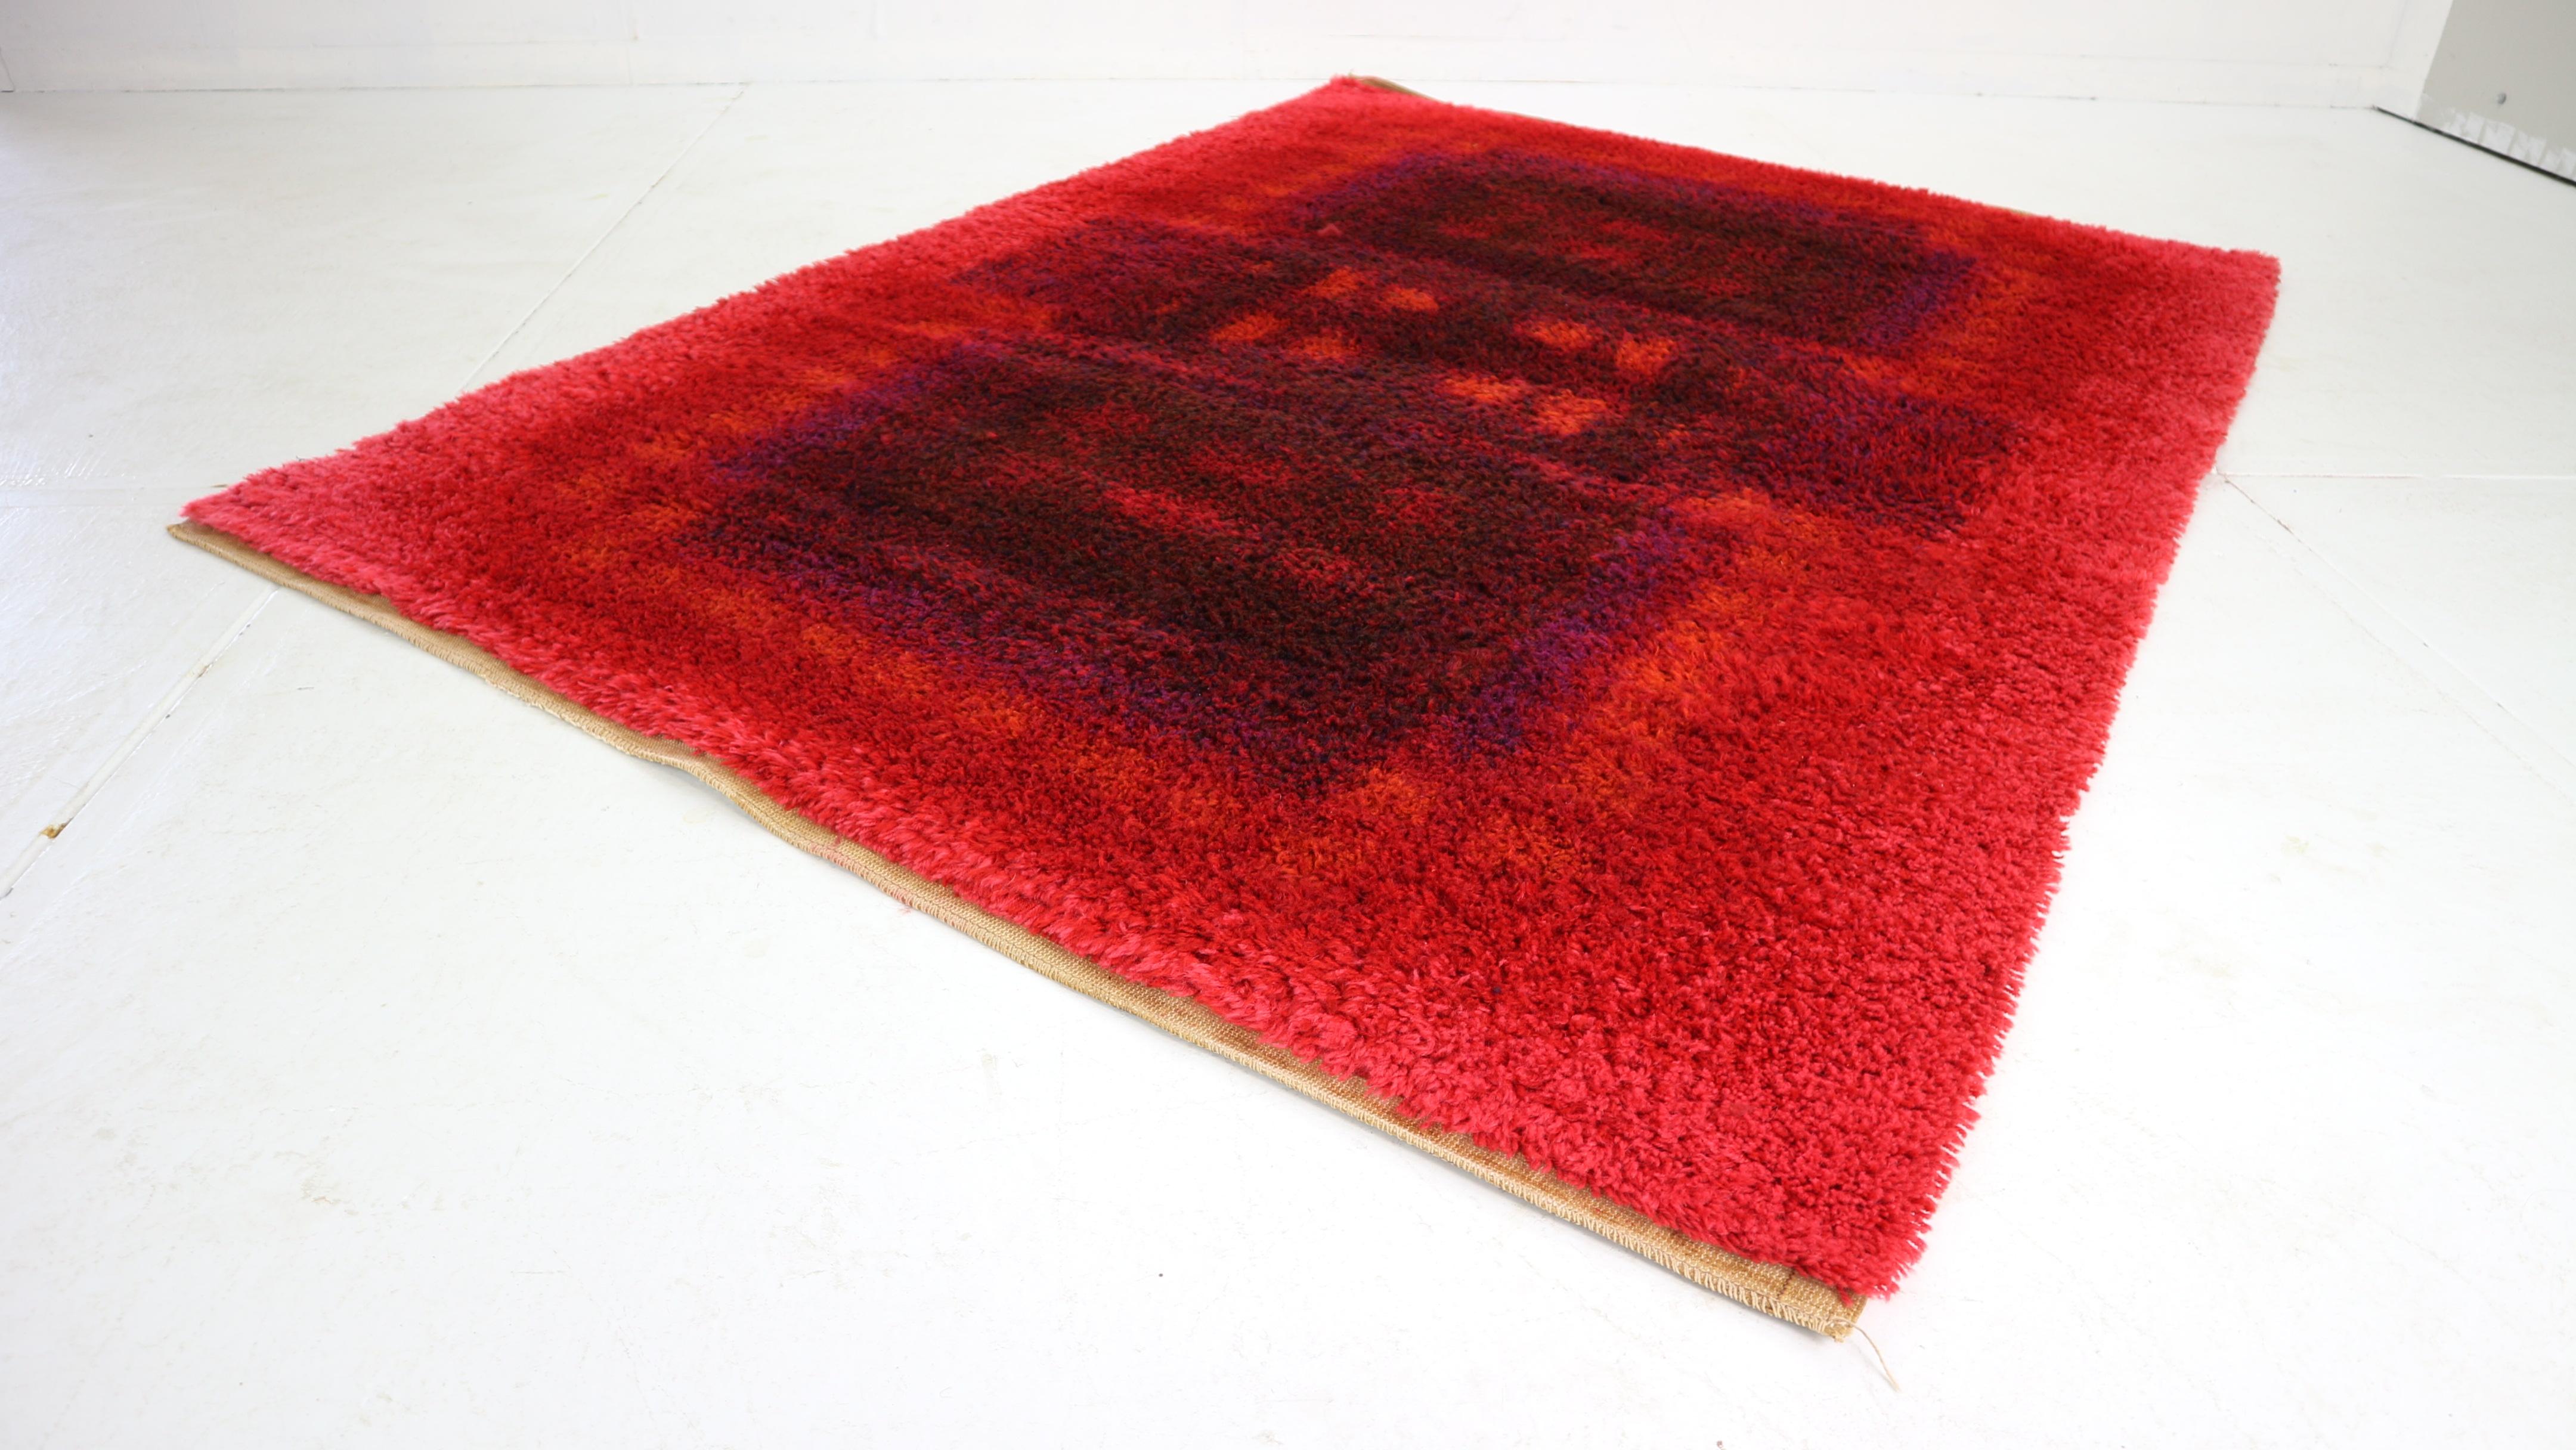 Wool Modernist Red Multi-Color High Pile Large Rya Rug by Desso, 1970's